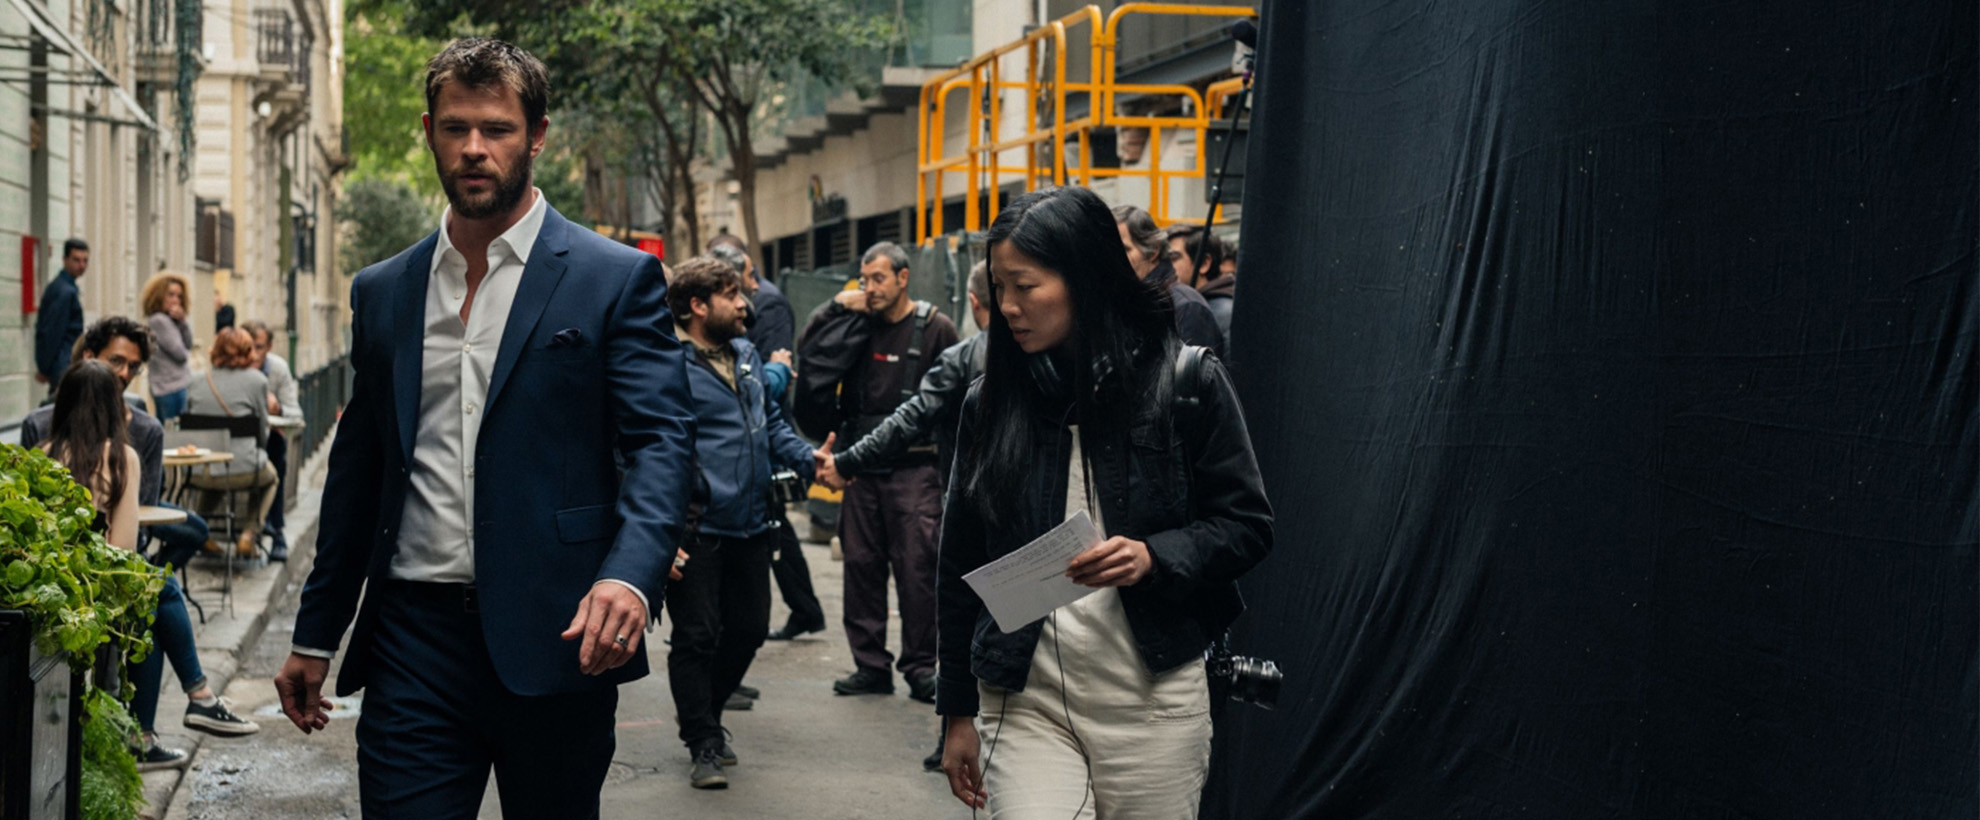 A man and a woman are walking down a street on a film set with many other people in the background.